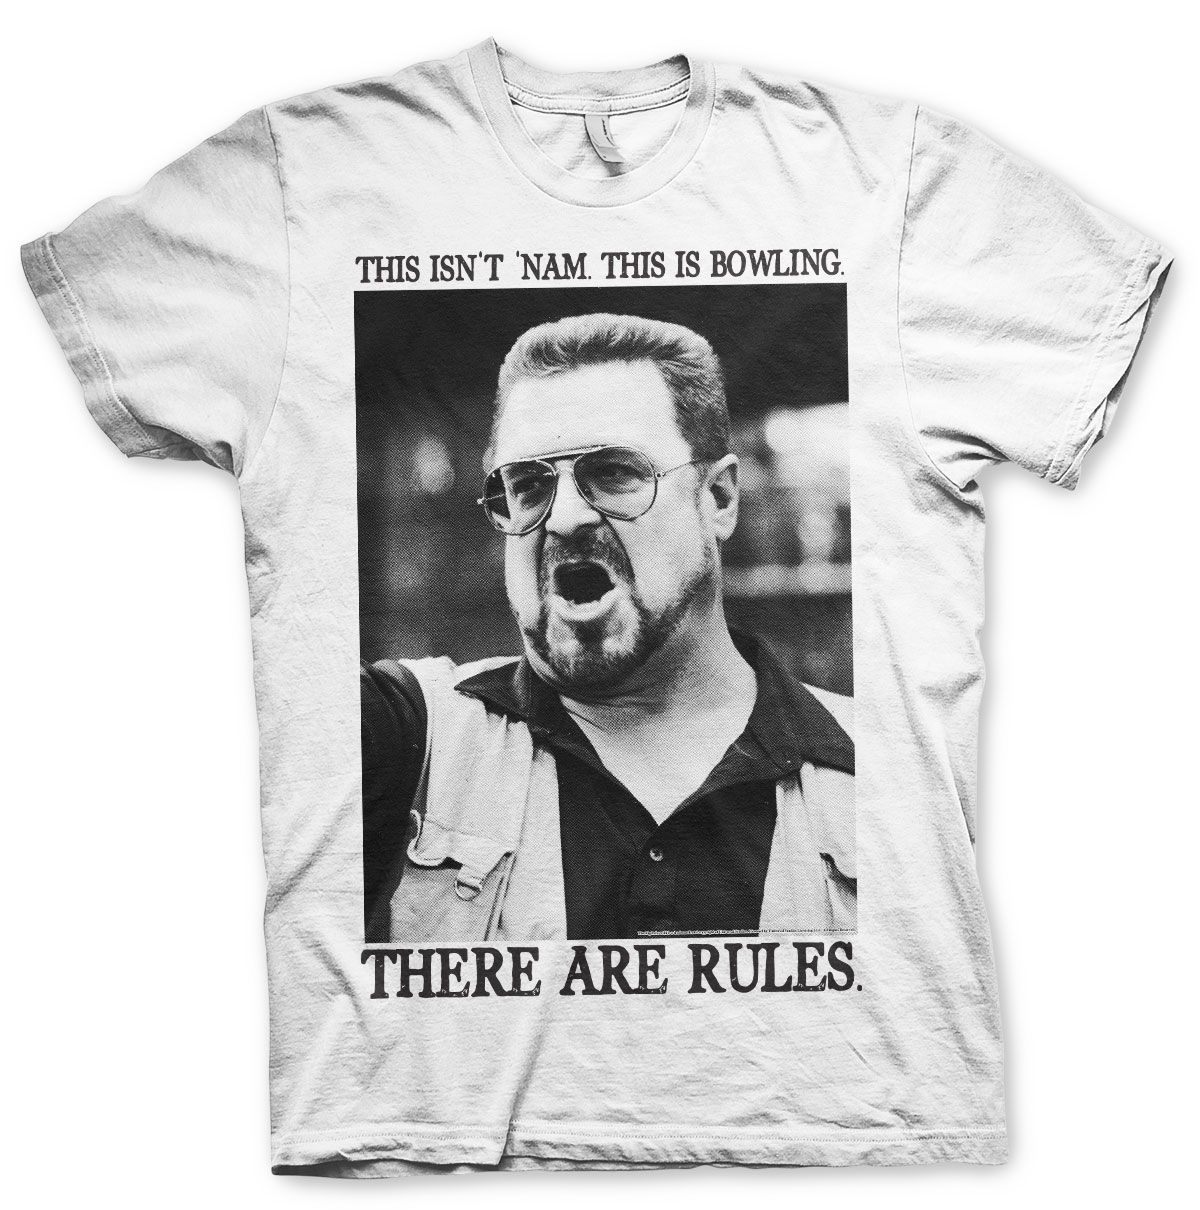 Big Lebowski - There Are Rules T-Shirt